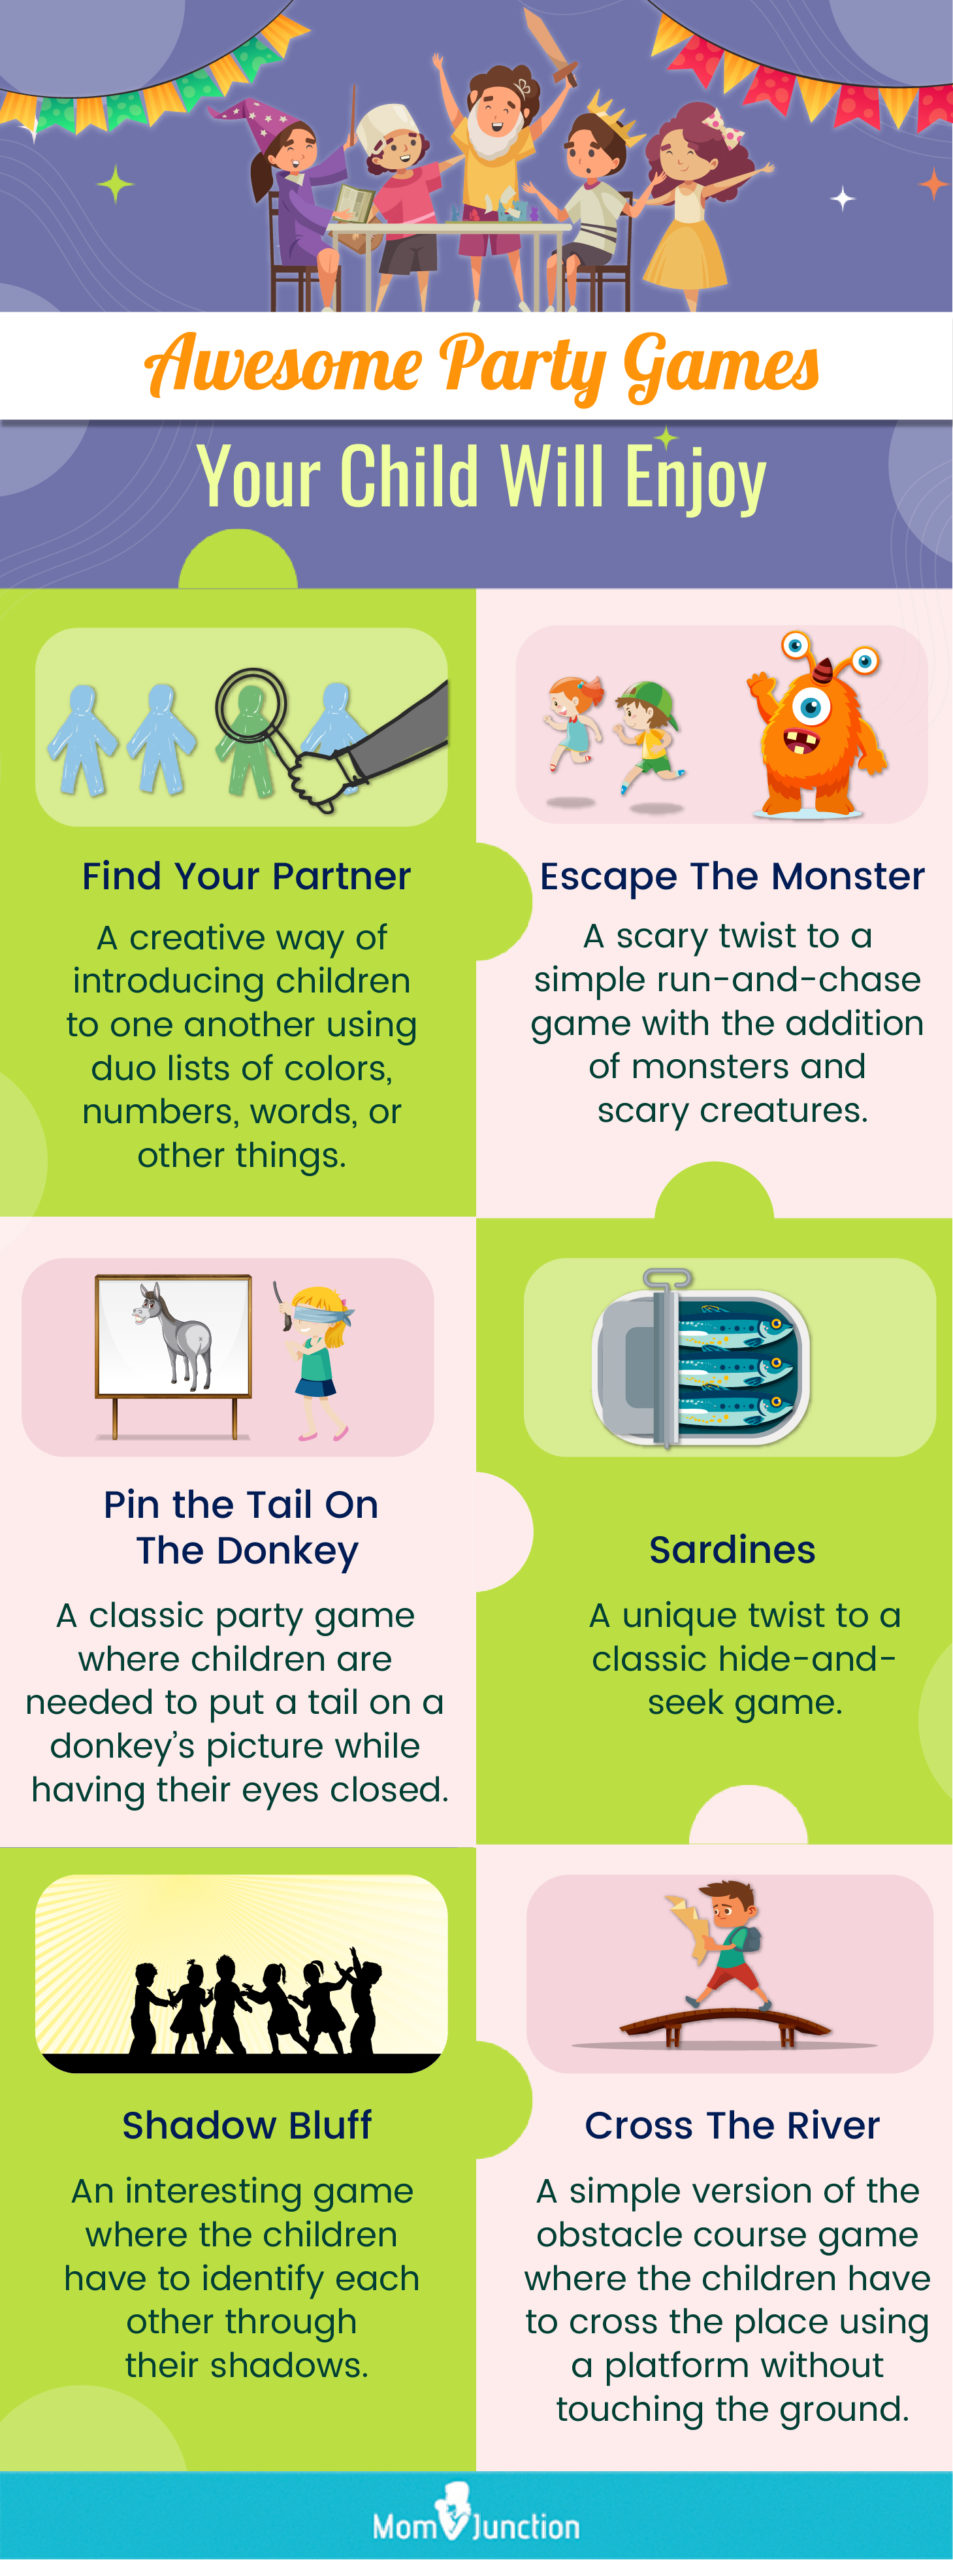 awesome party games your child will enjoy (infographic)